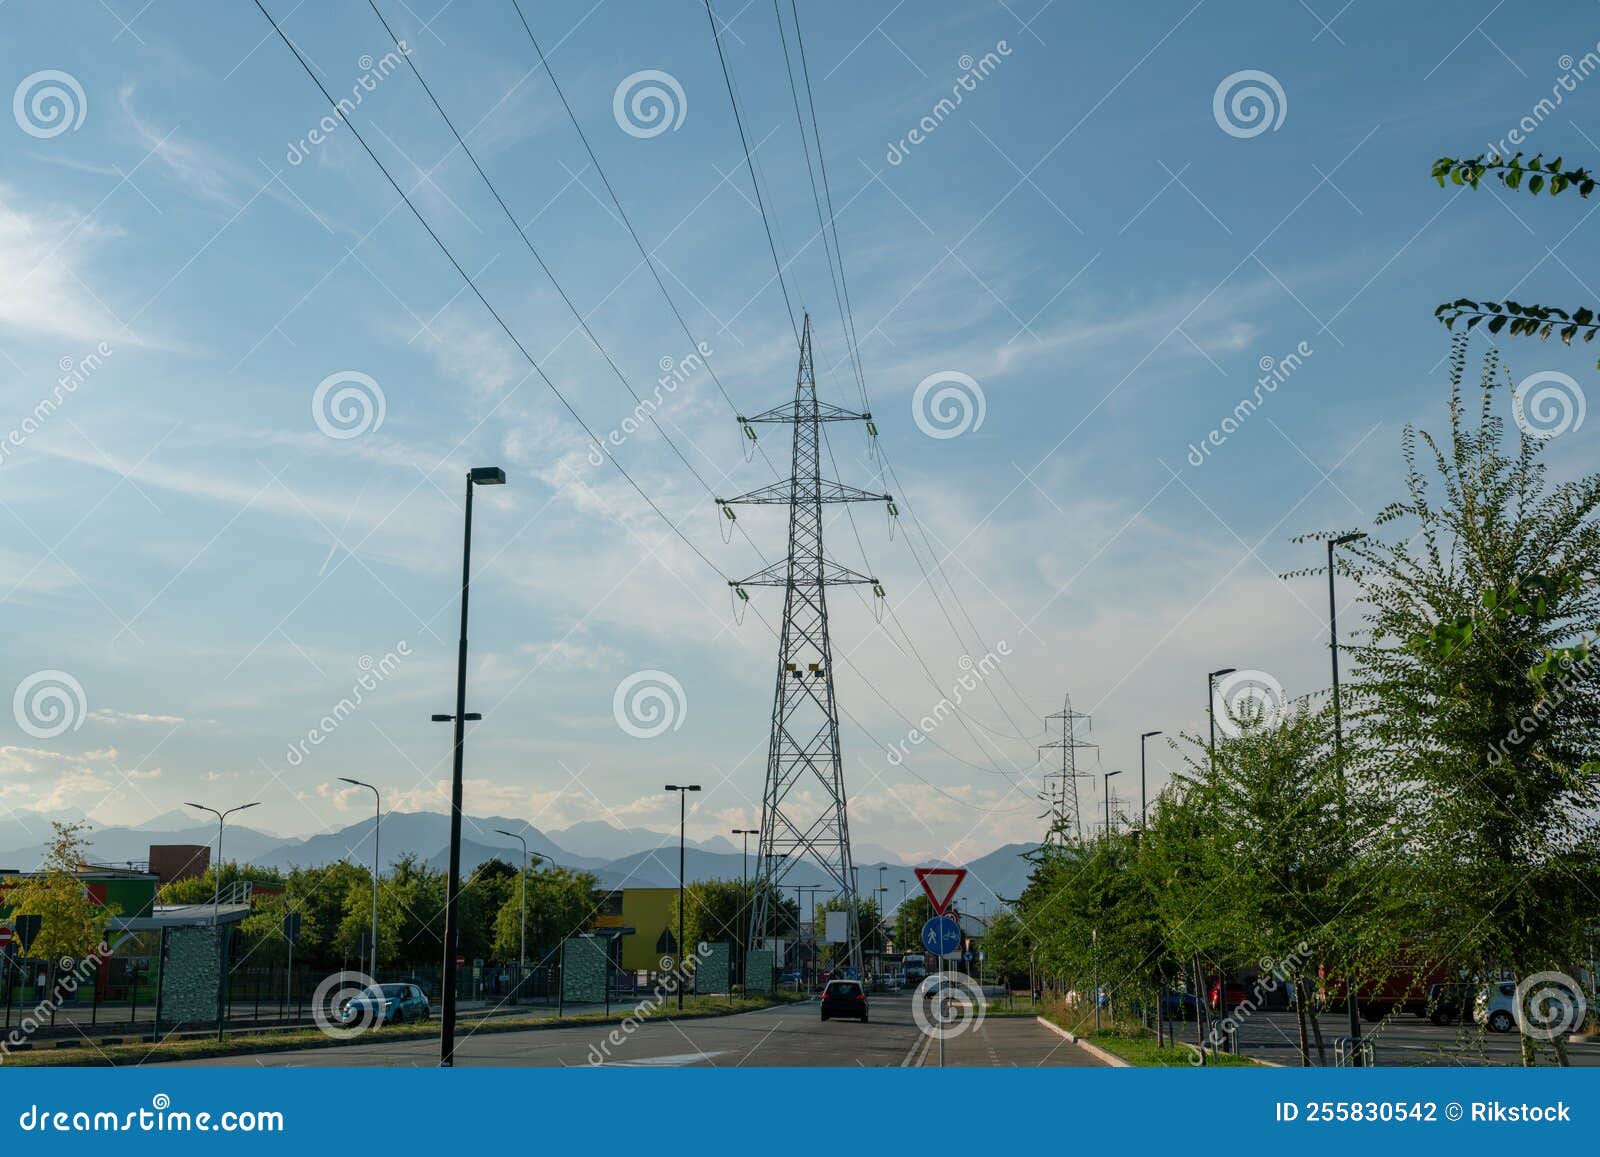 electricity pylon: energy crisis and energy cost, two increasingly important voices in the economic, industry and politica.